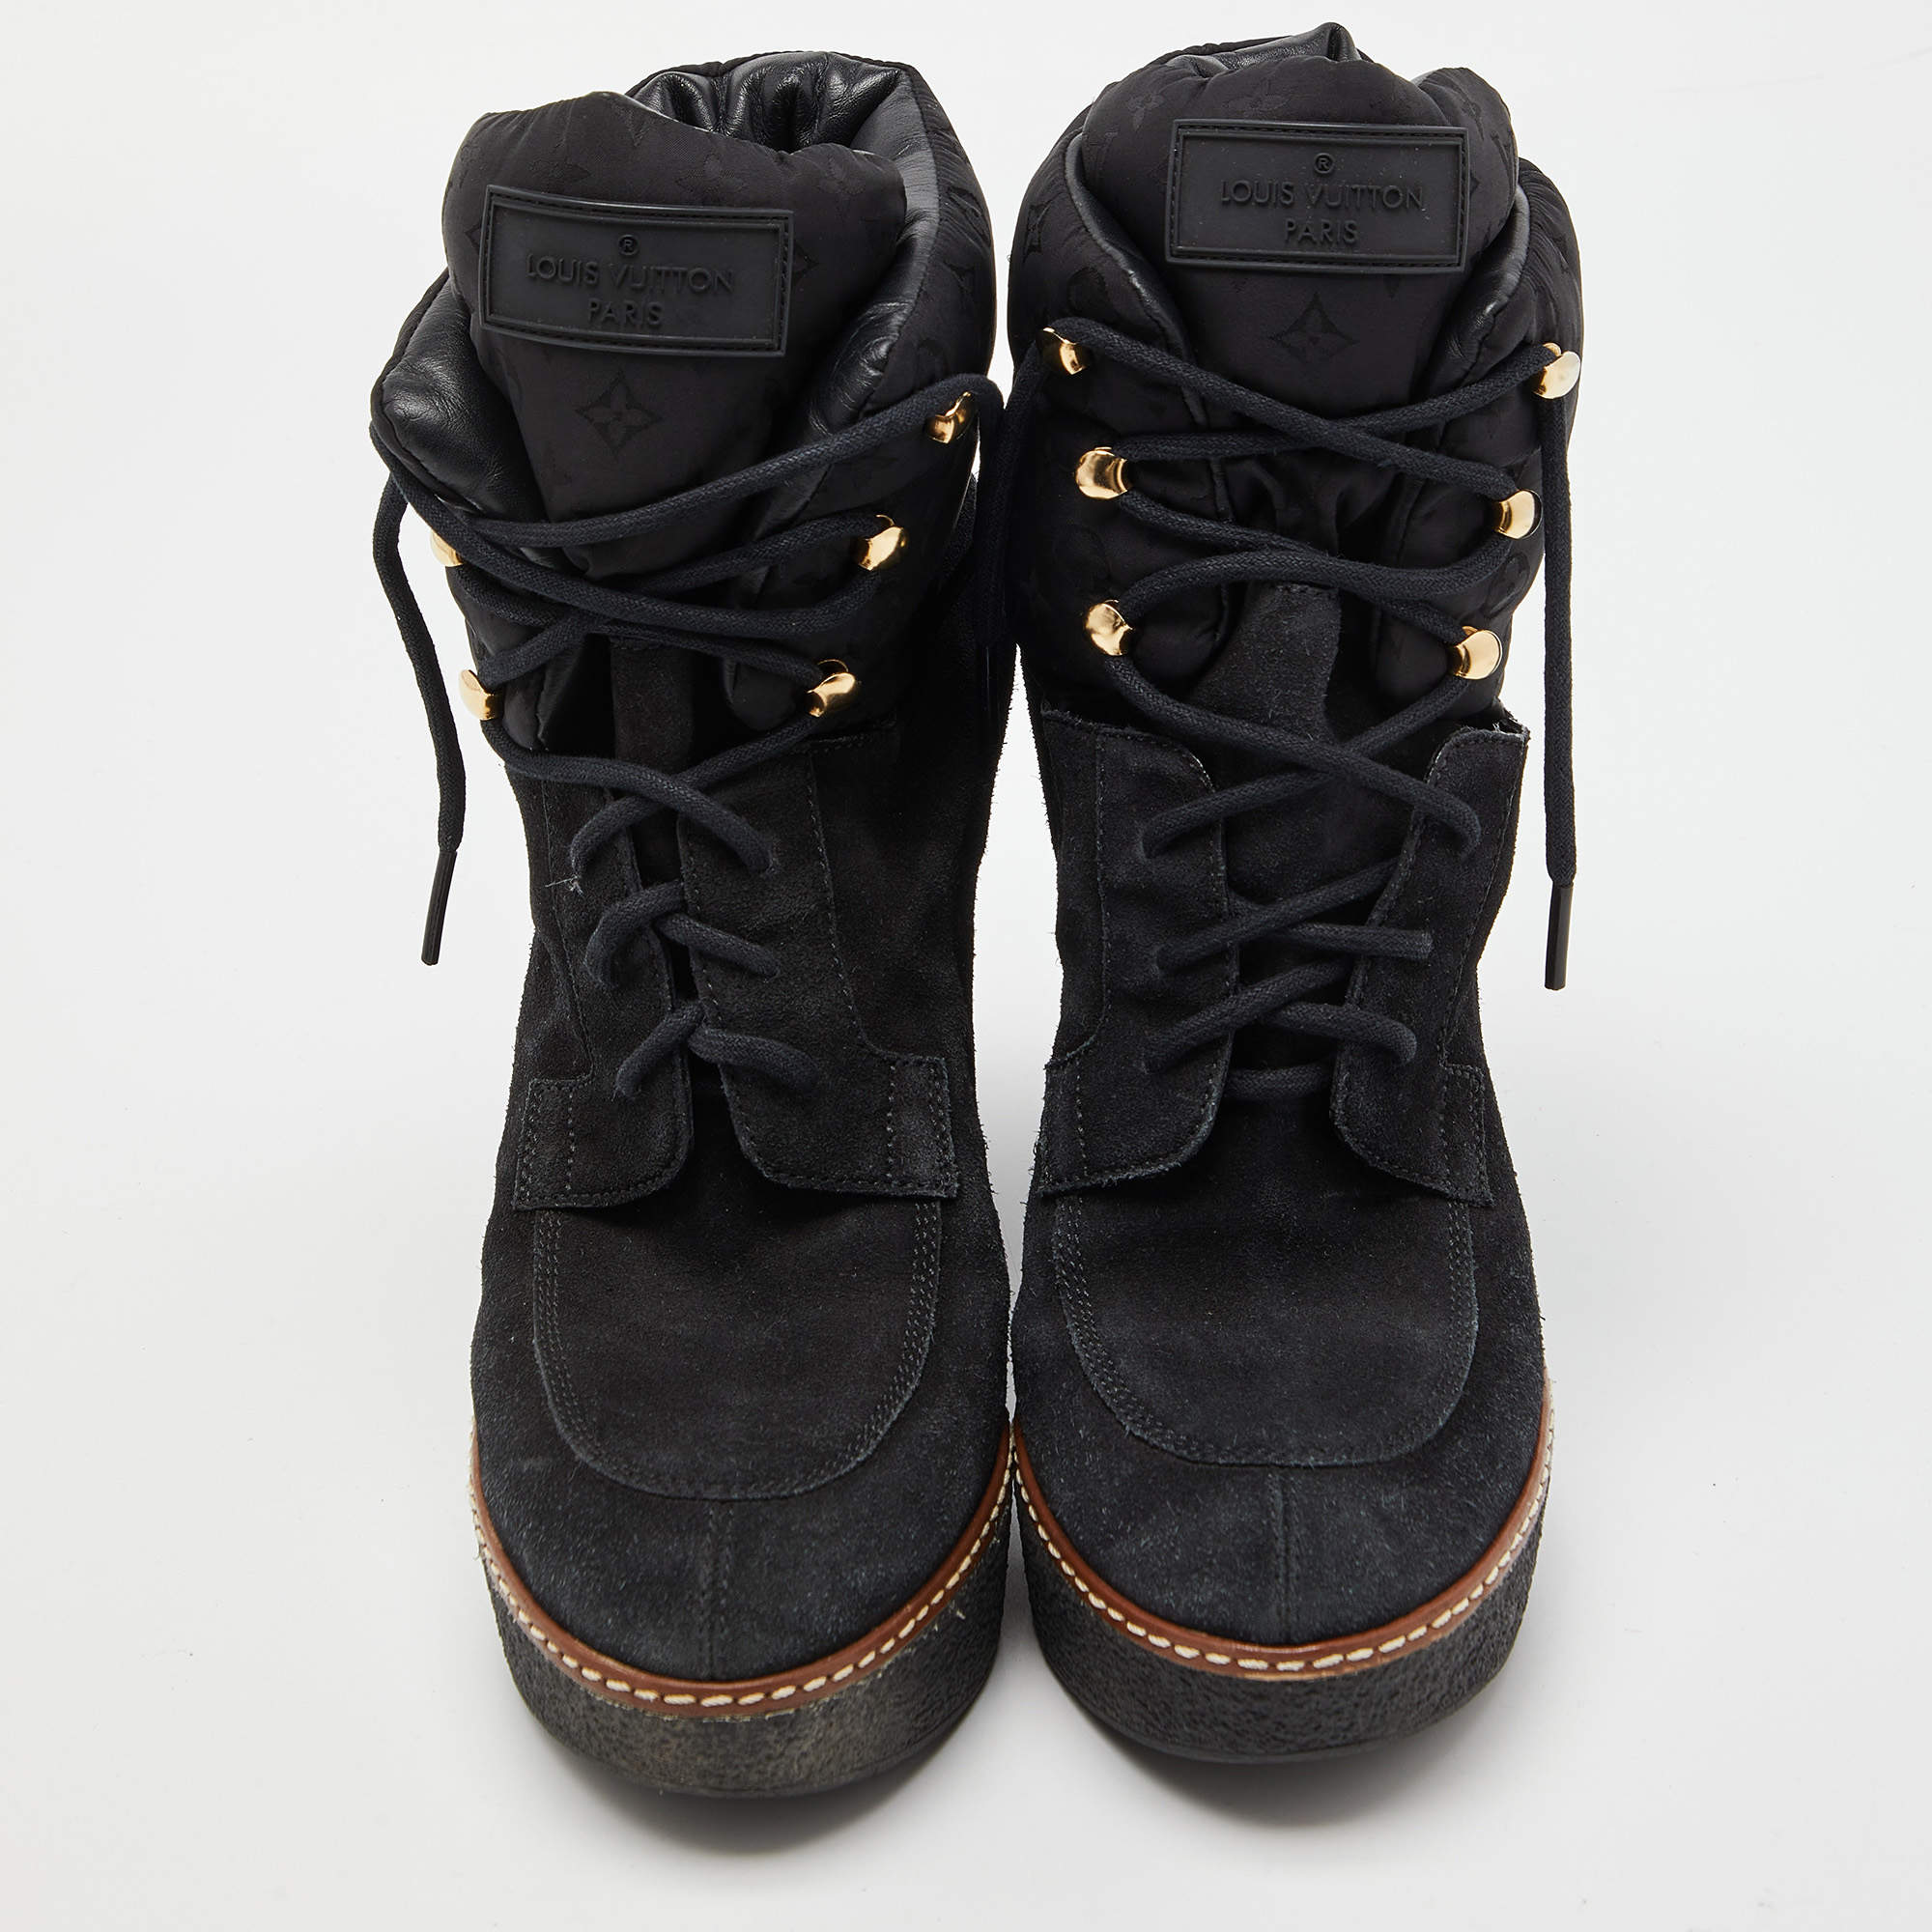 Louis Vuitton Black Suede and Monogram Fabric Wedge Ankle Boots